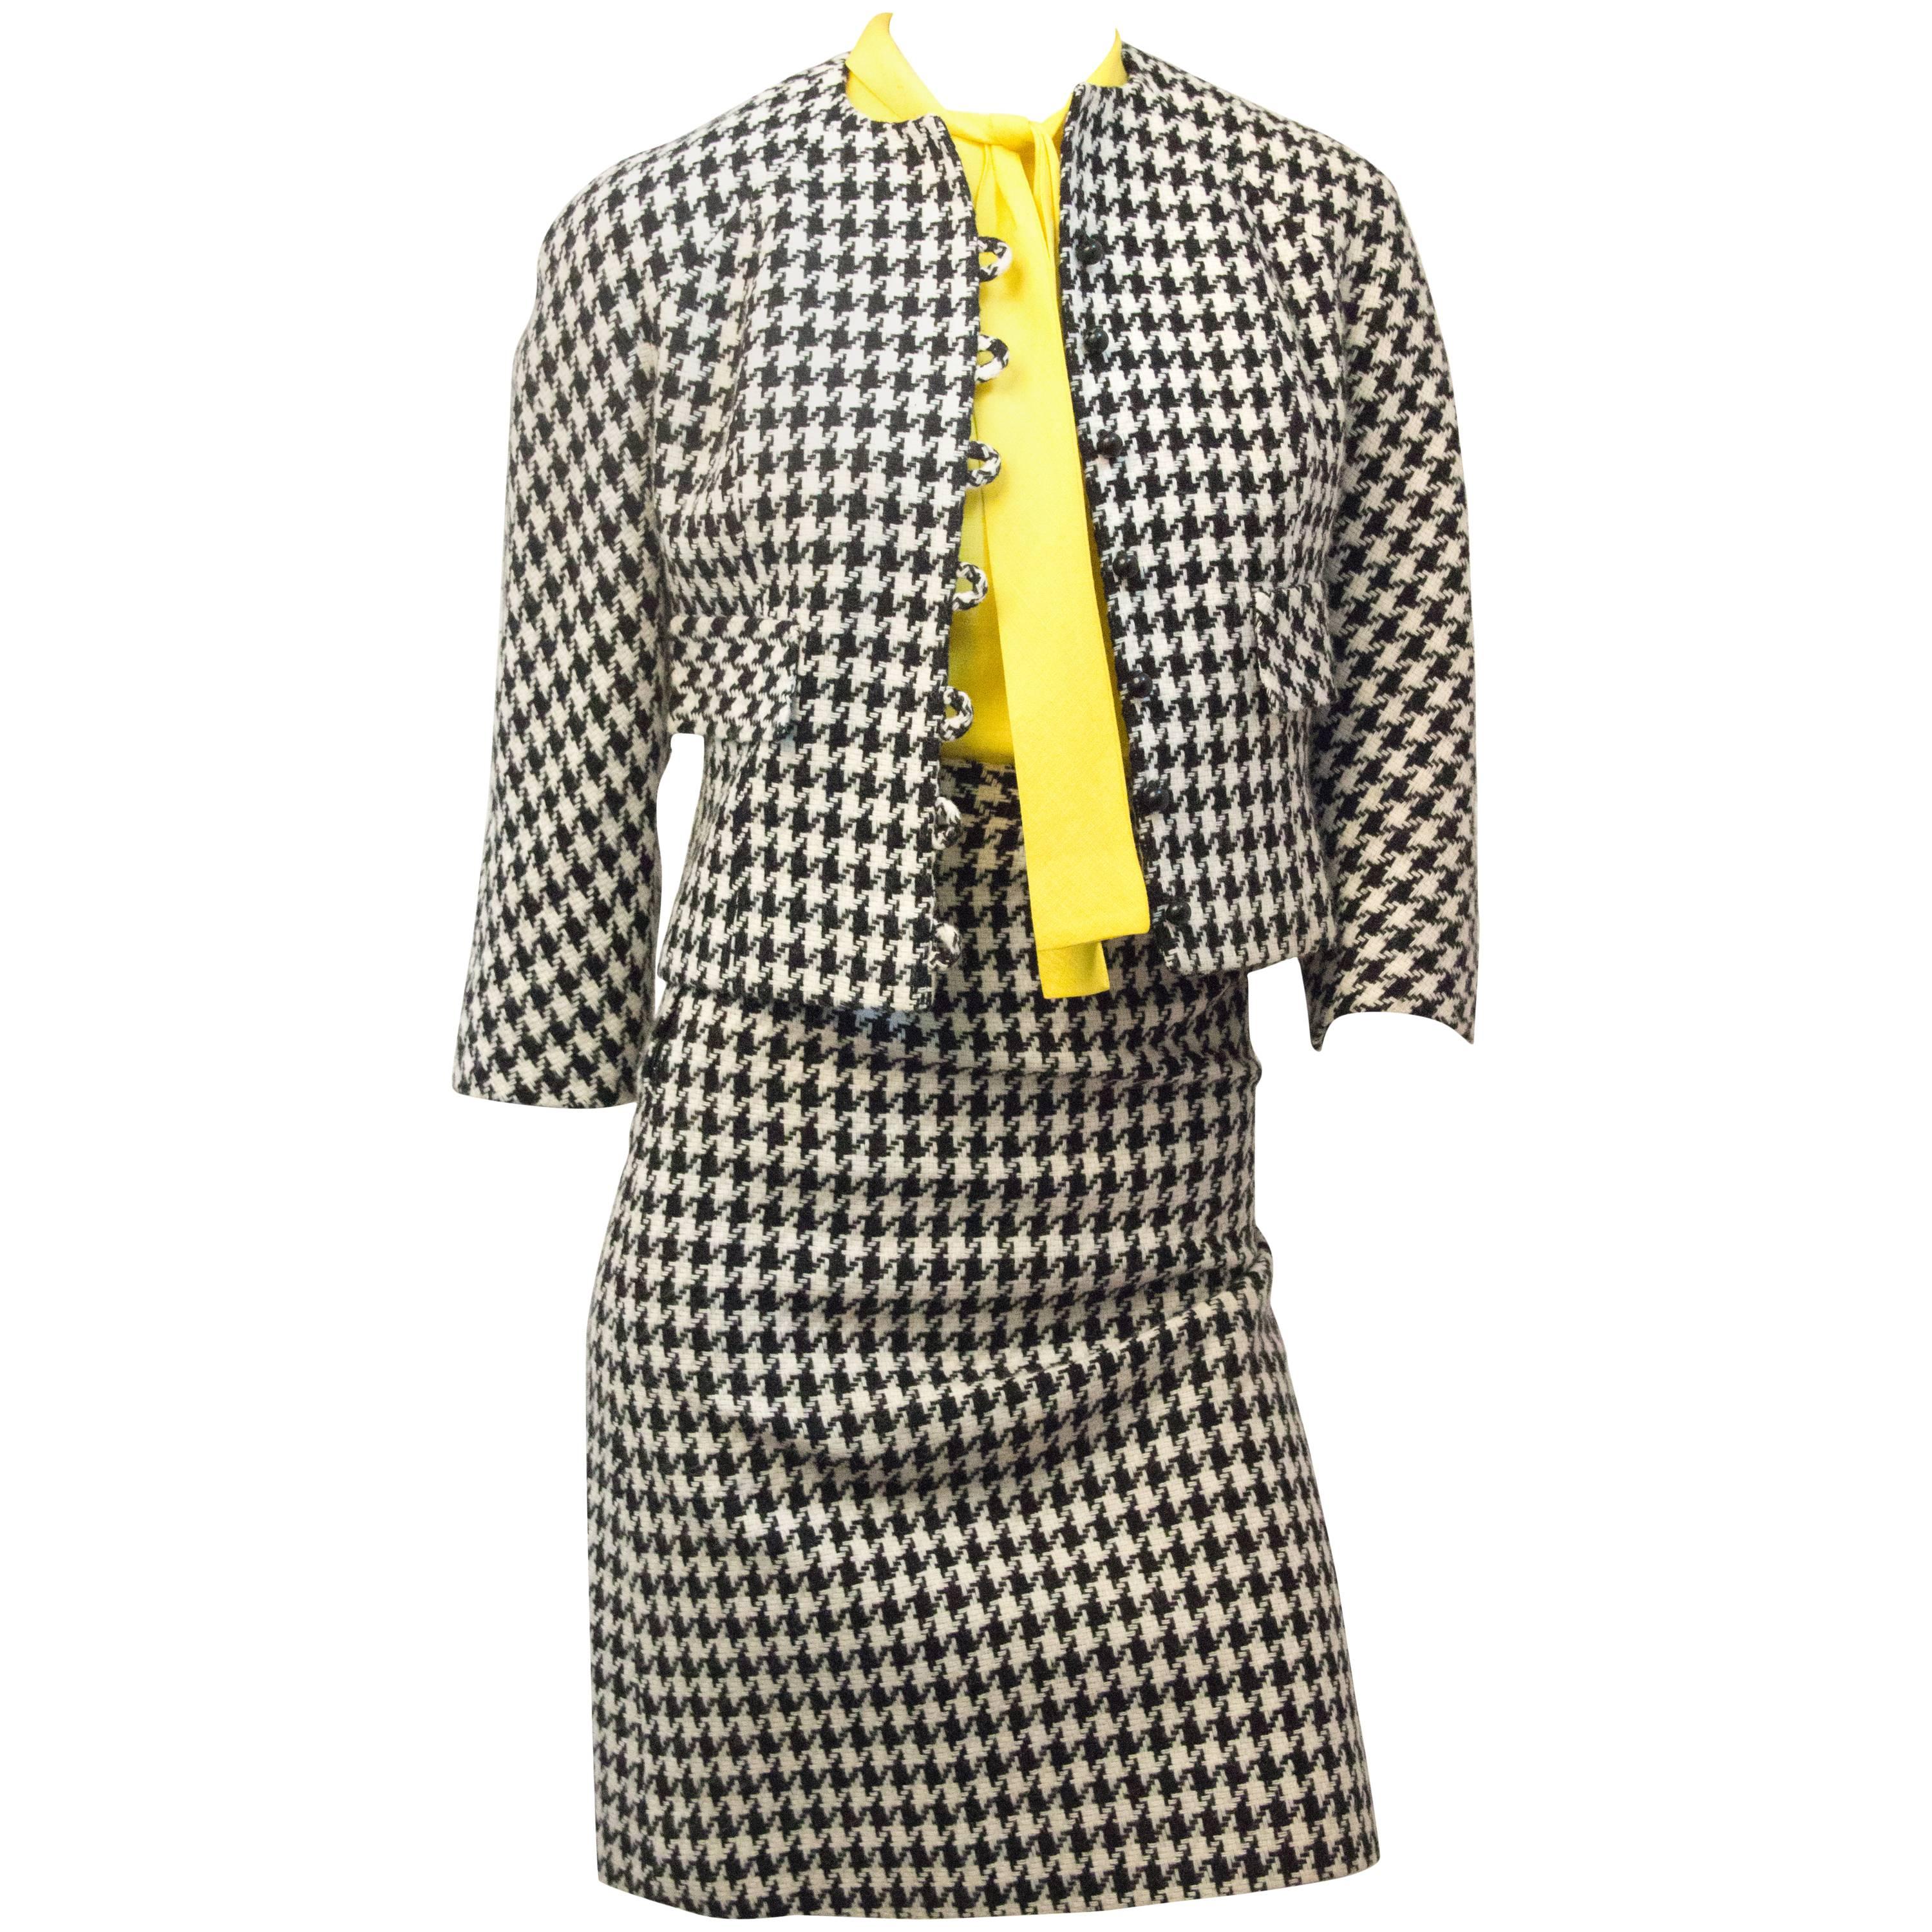 60s Mod Black & White Houndstooth Suit with Yellow Blouse  